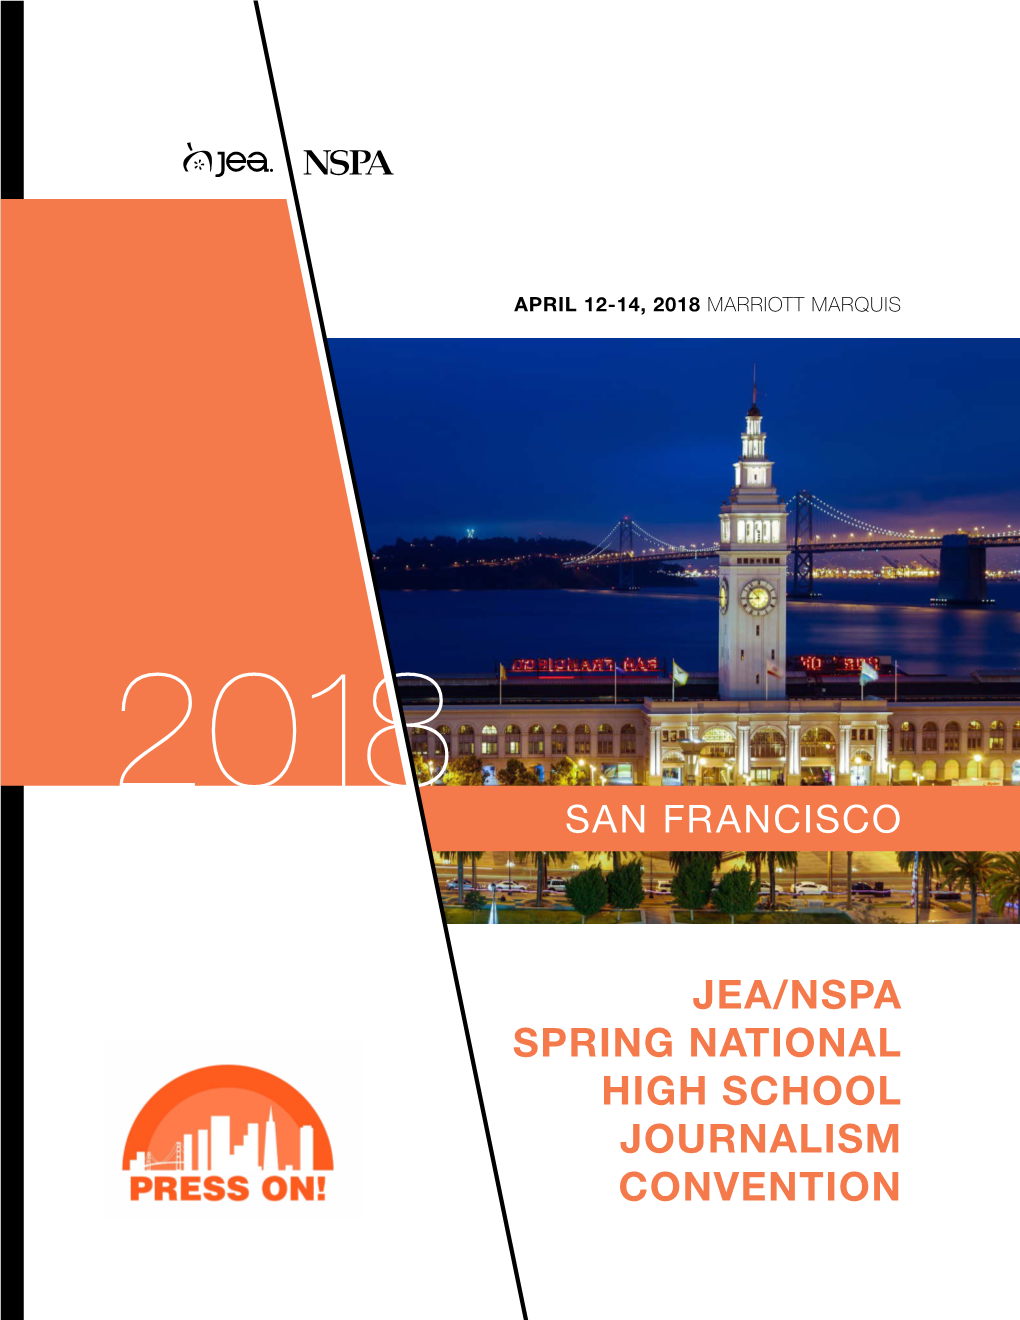 JEA/NSPA SPRING NATIONAL HIGH SCHOOL JOURNALISM CONVENTION CONTENTS SEMINARS & SCHEDULING REGISTRATION FEES Keynote Speakers